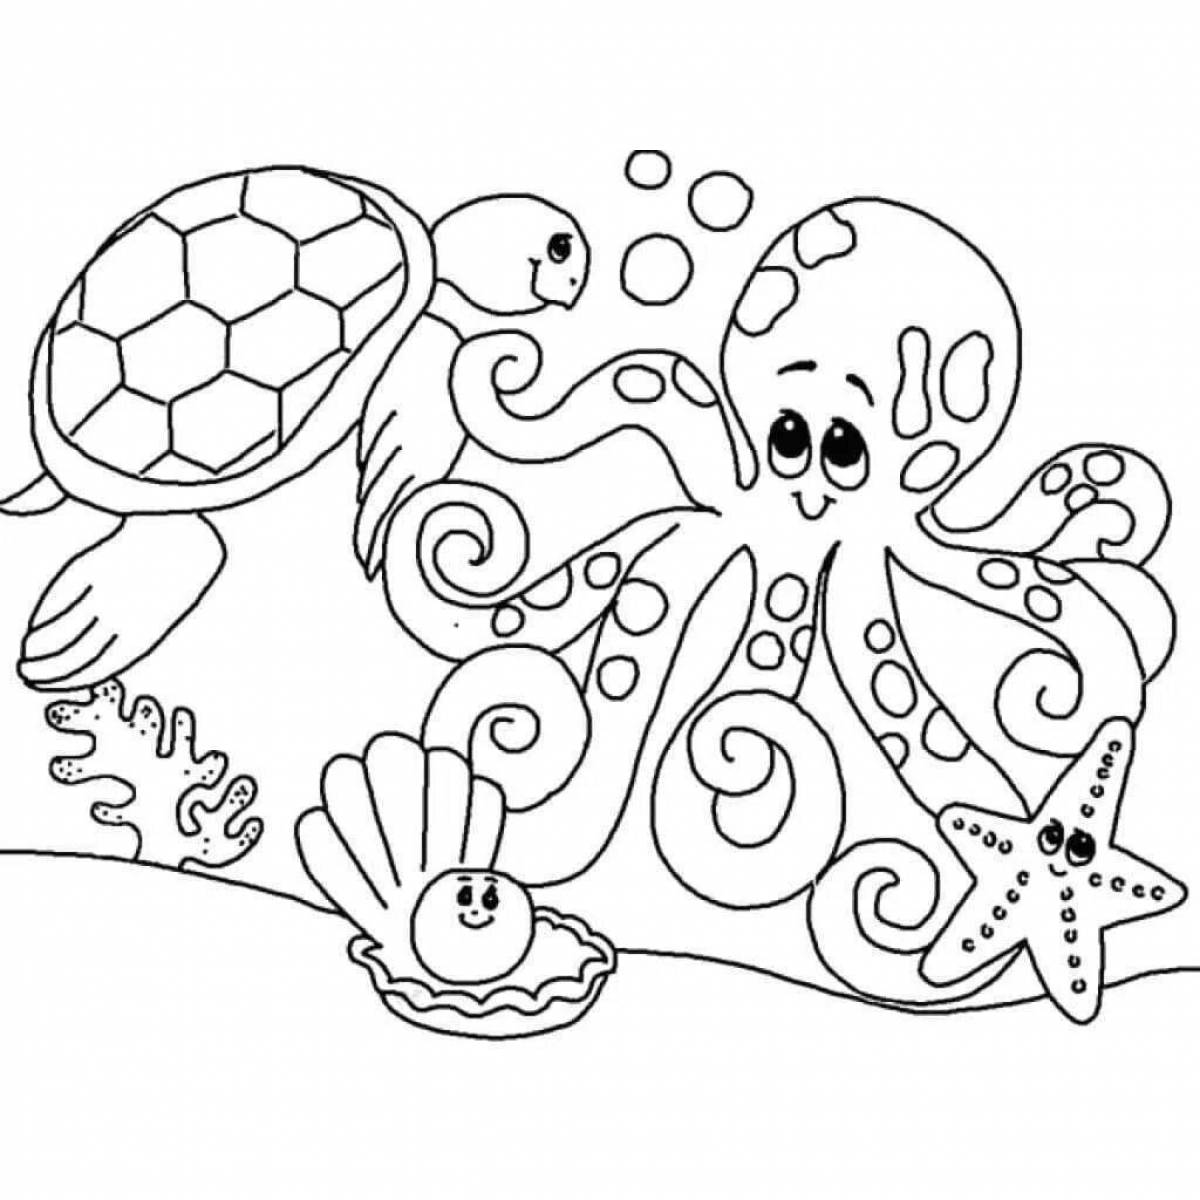 Major coloring pages animals of the seas and oceans